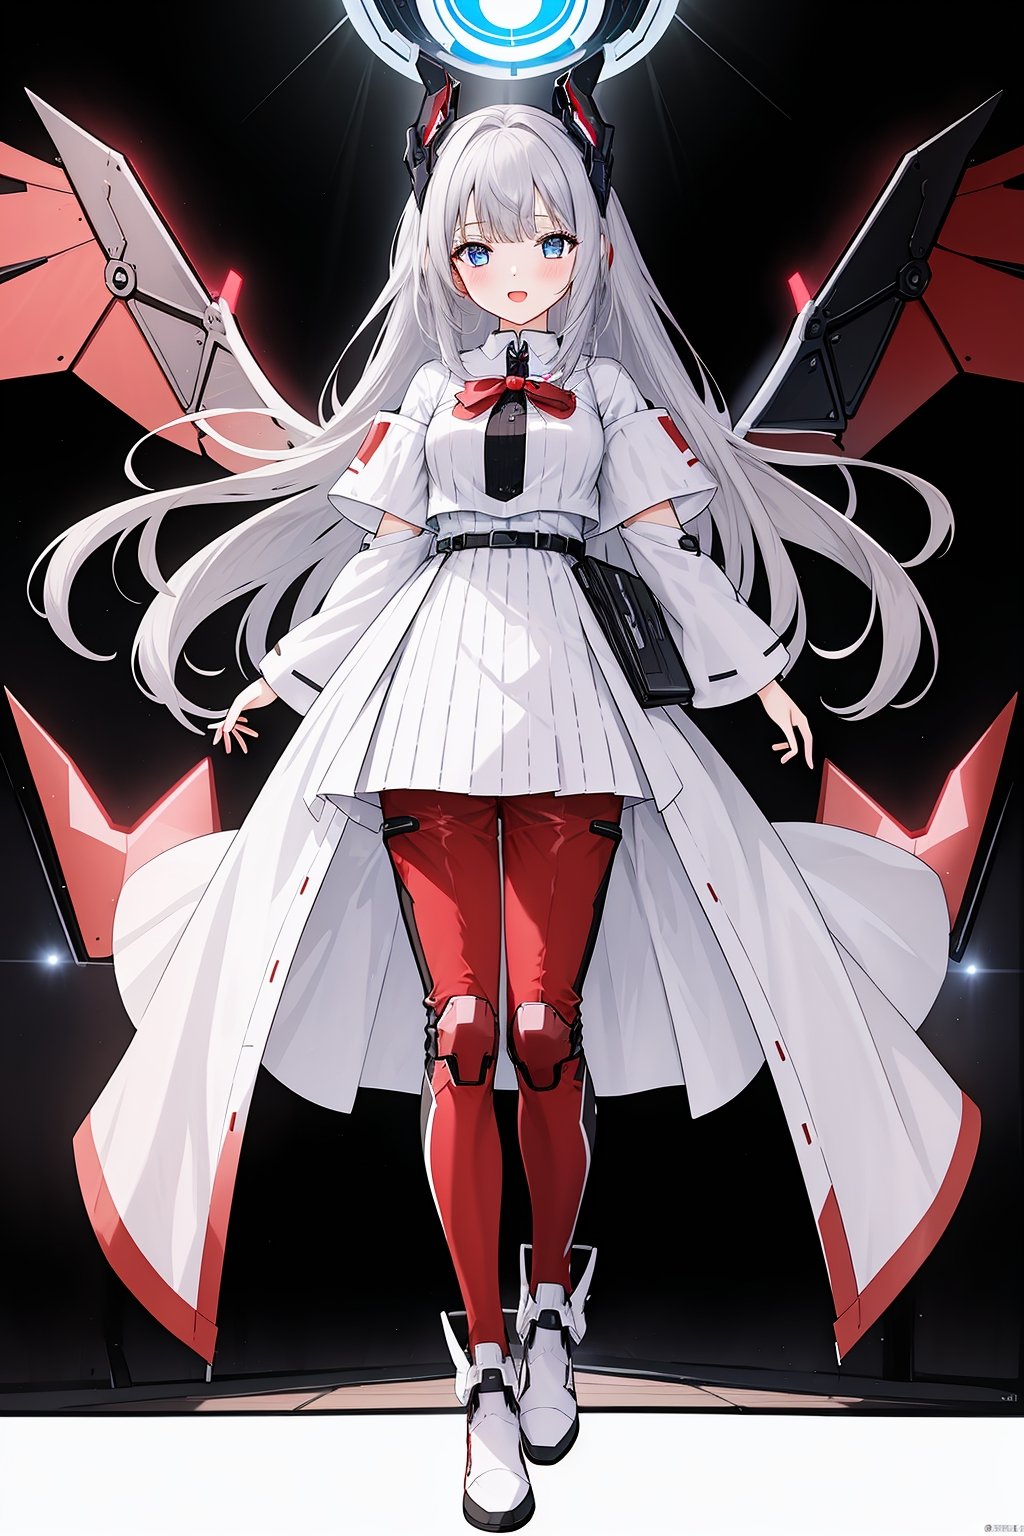 1 girl, solo, red Mecha pants, wings, blue eyes, long hair, red shoes, hair accessories, looking at the audience, gray hair, hair accessories, bangs, blue eyes, staff, clean background, mechanical wings, video card fan, gloves, white, simple background, cute, video card promo character, console, keyboard, mouse, joystick, red clothes, festive, Red theme,<lora:天启姬:0.7>,